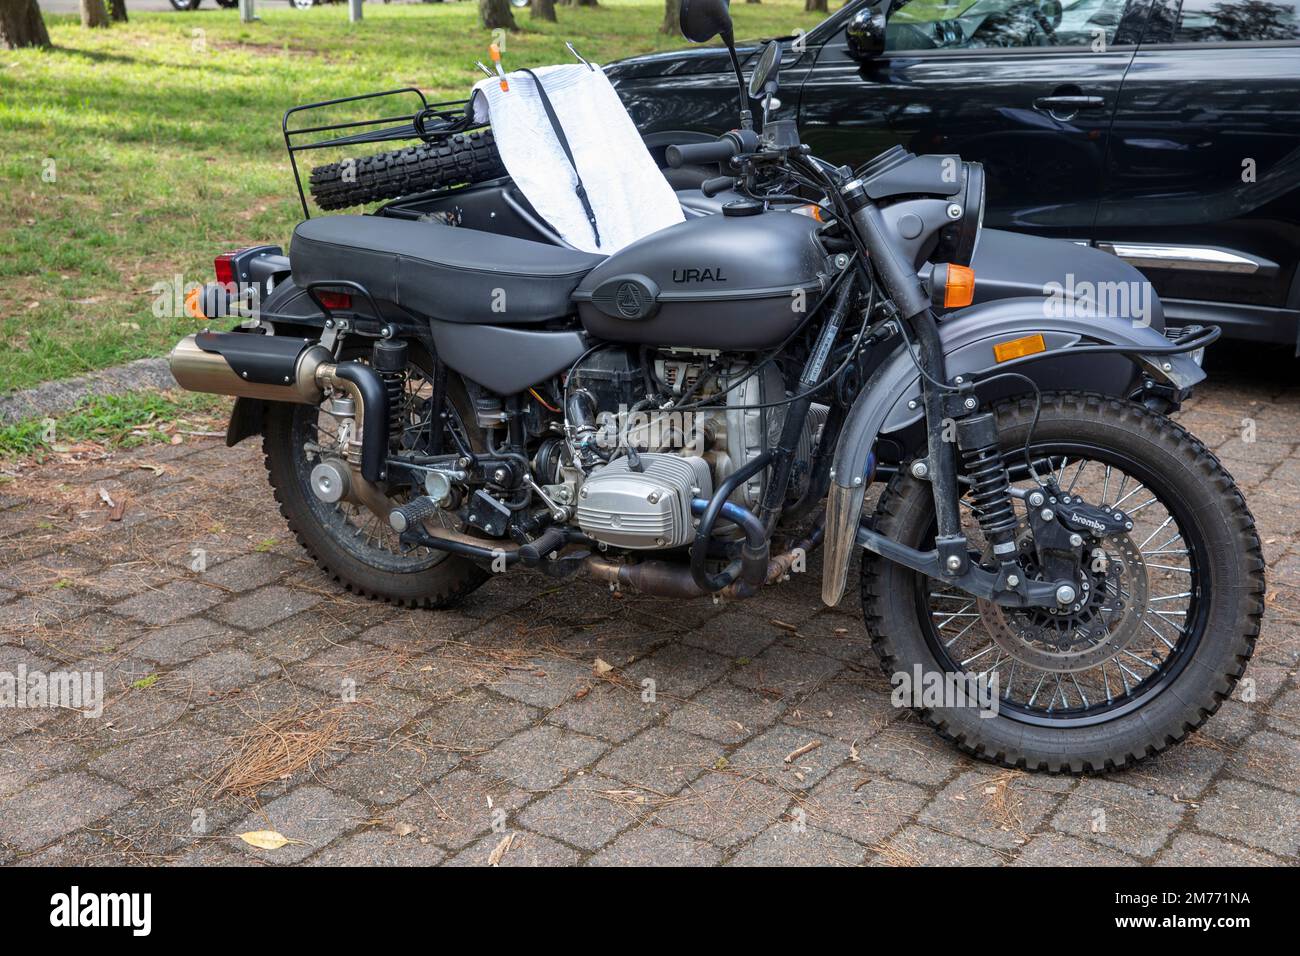 Ural motorbike motorcycle with a sidecar attached parked in Bayview,Sydney,NSW,Australia Stock Photo